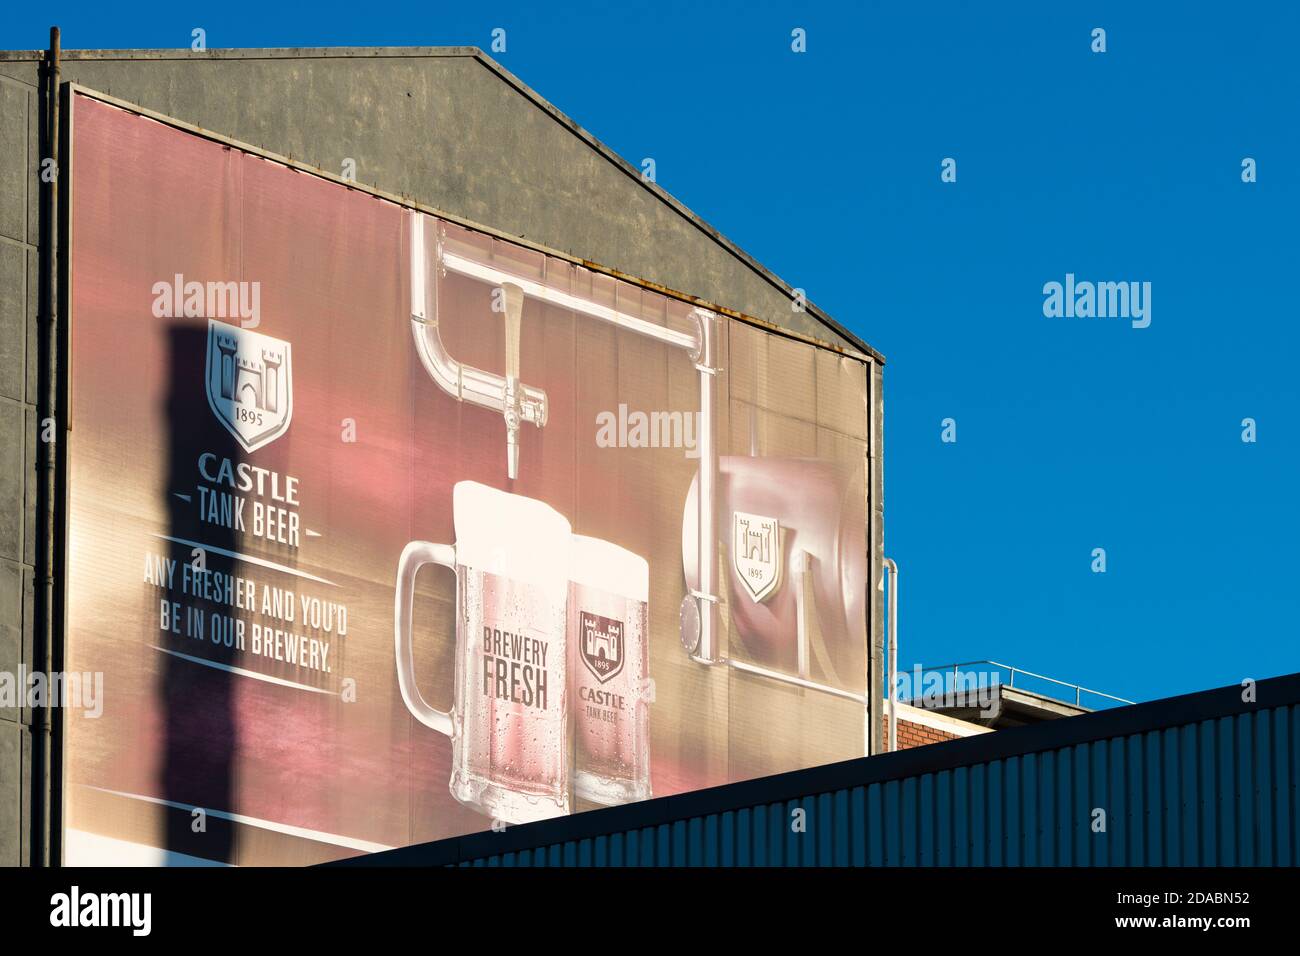 billboard advert, marketing advertisement on a brewery wall for Castle beer in South Africa Stock Photo